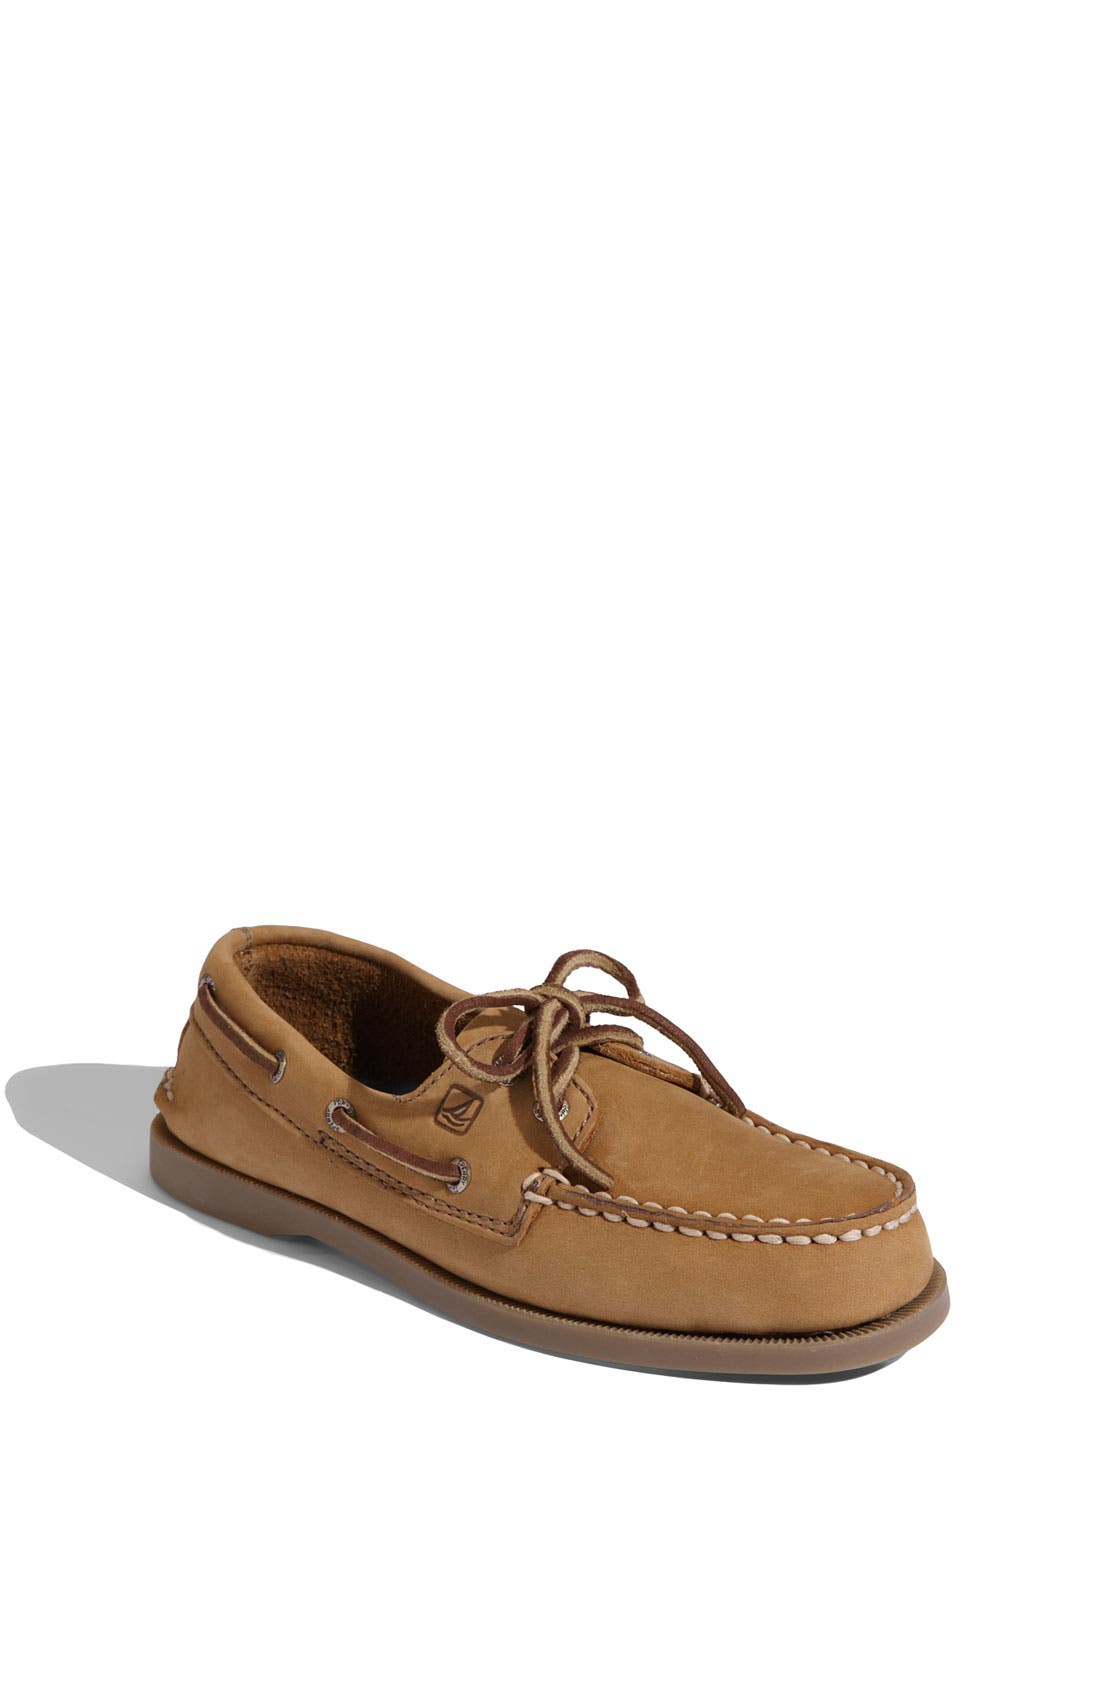 Girls' Sperry Shoes